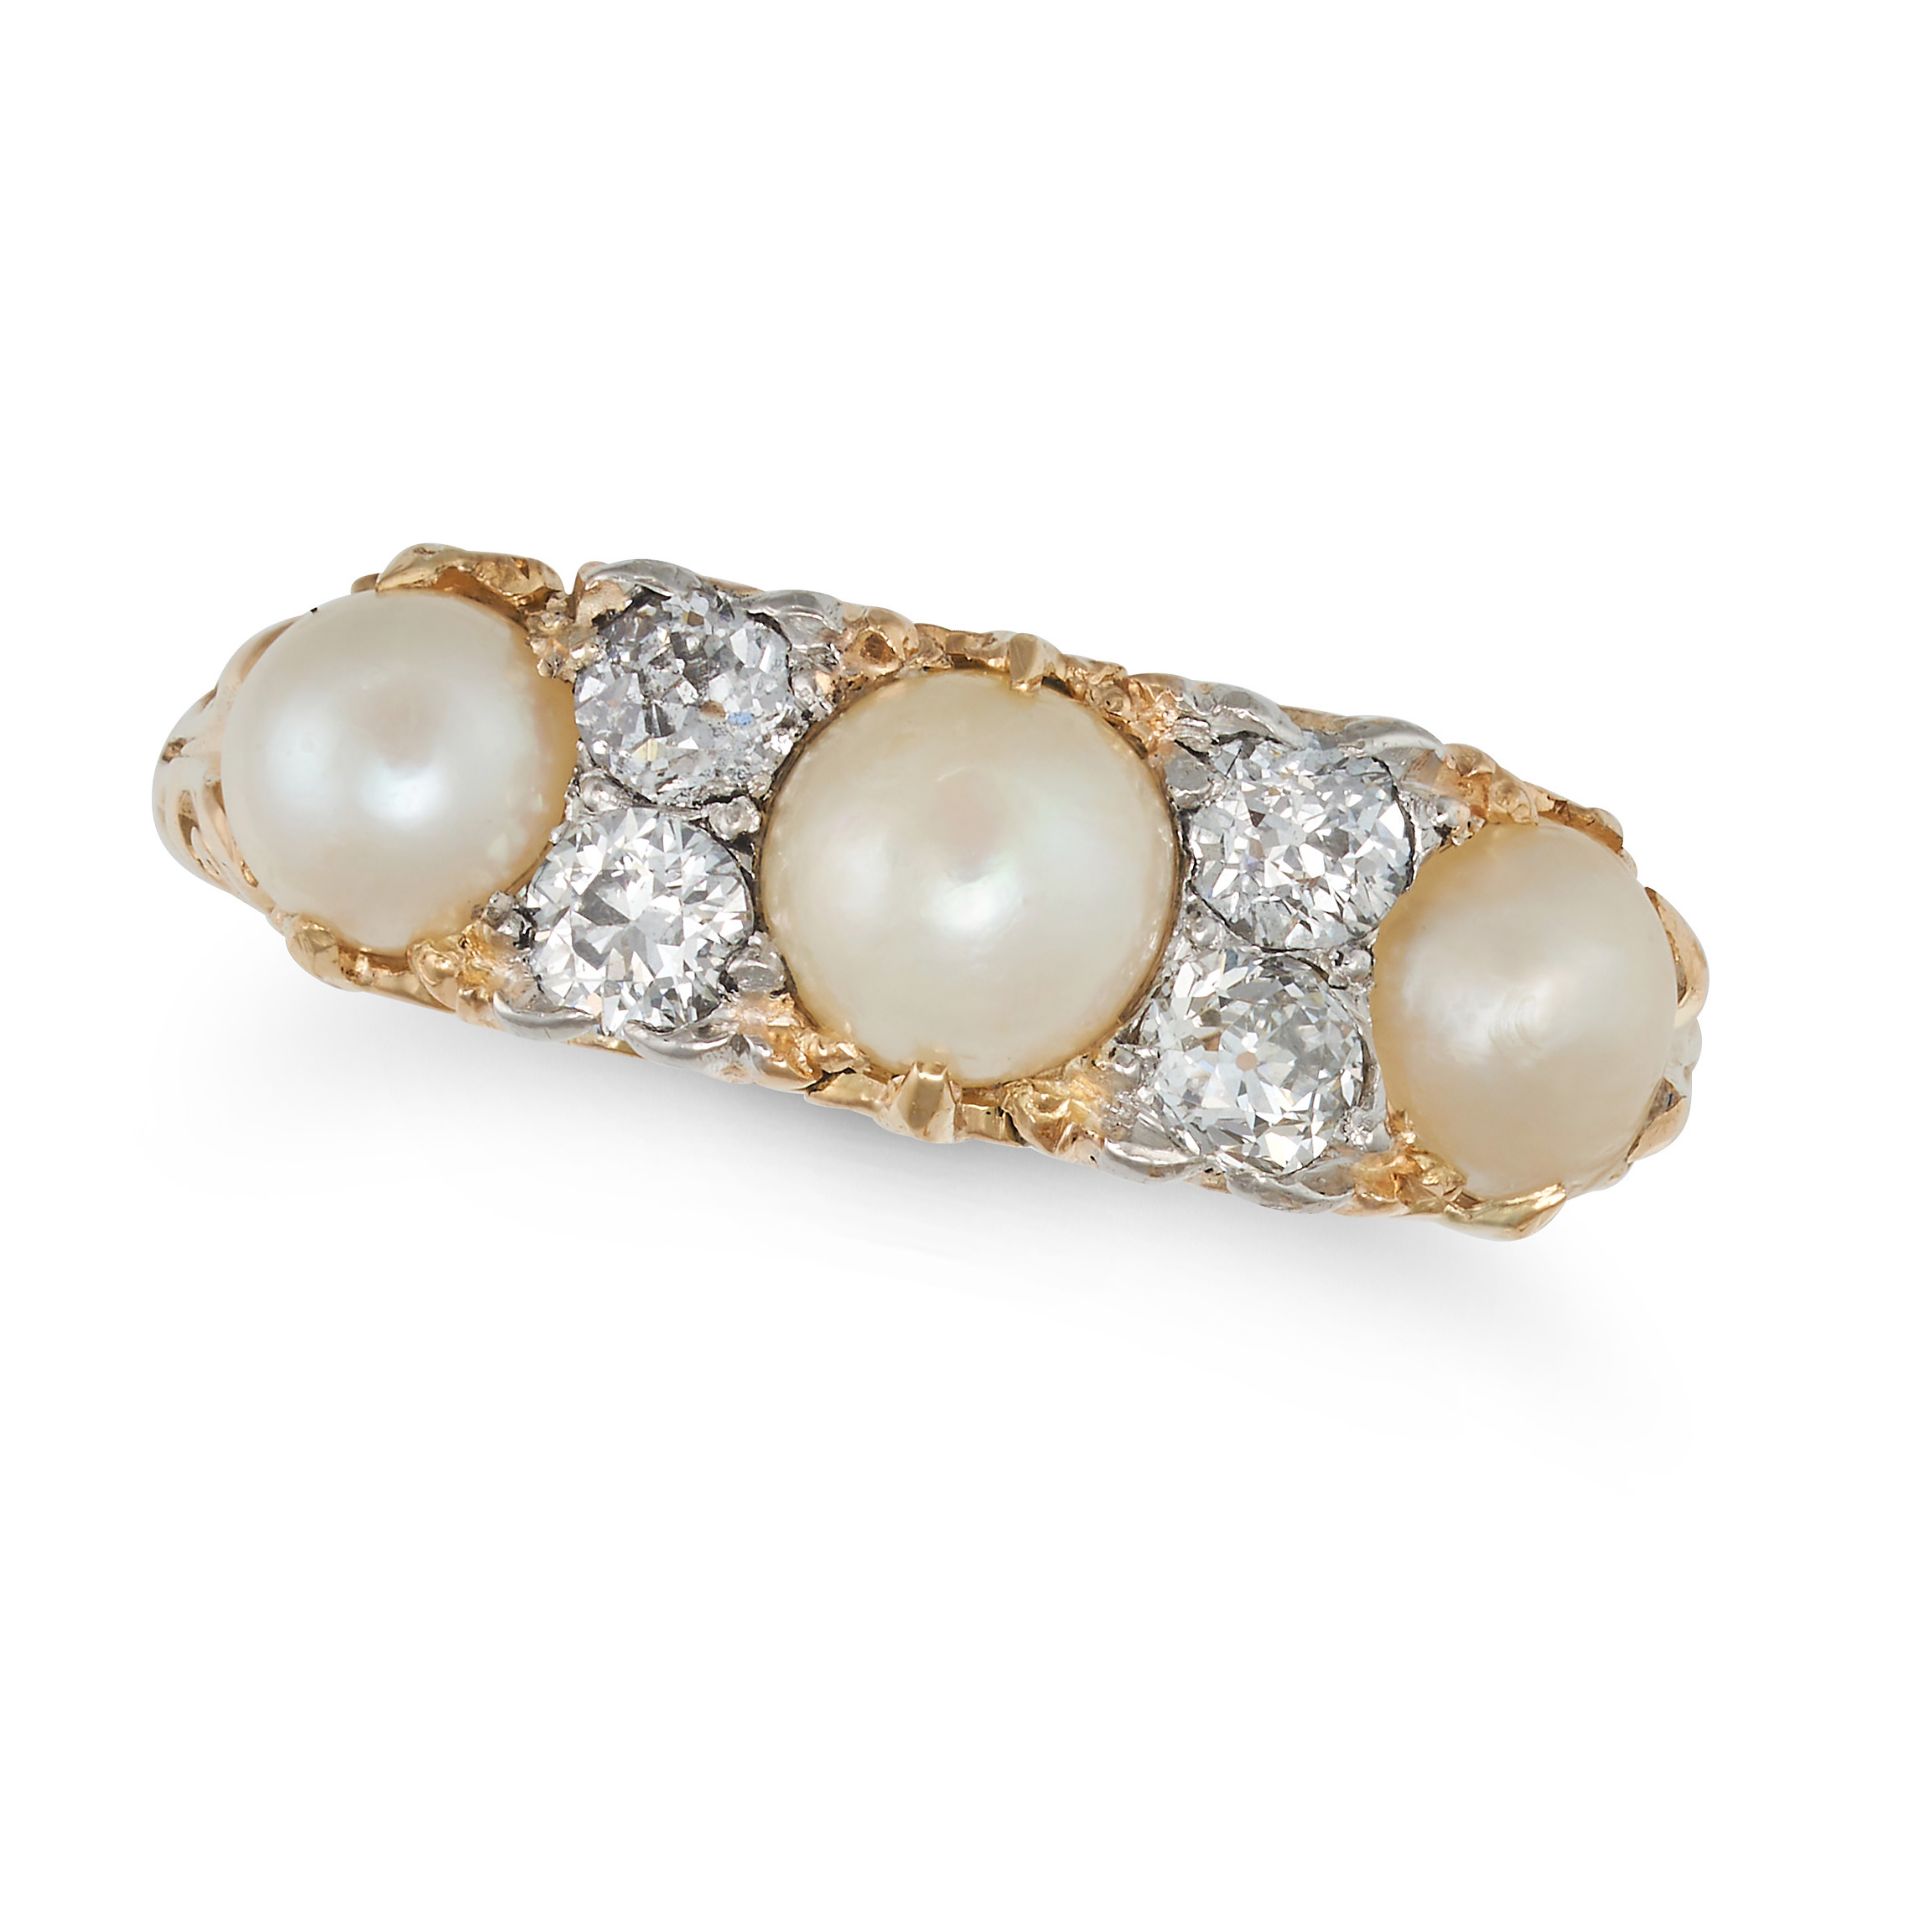 AN ANTIQUE PEARL AND DIAMOND RING in yellow gold, set with three pearls accented by pairs of old ...